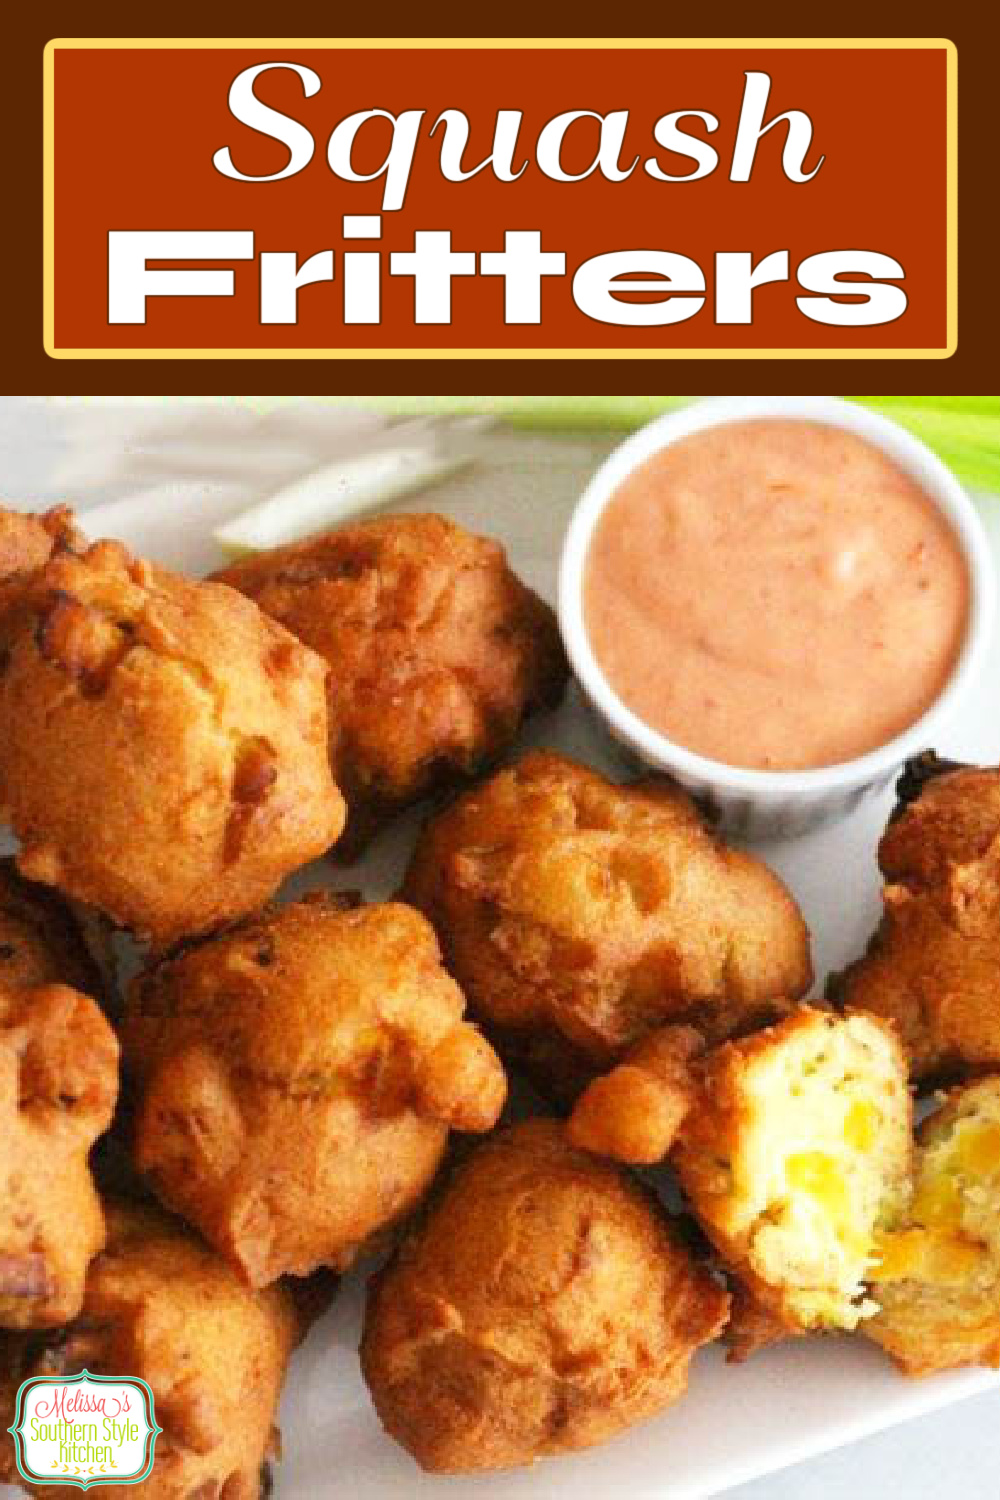 Serve these hushpuppy-like crispy Squash Fritters with a spicy sriracha sauce for dipping #squashfritters #squash #fritters #summerrecipes #hushpuppies #srirachasauce #yellowsquash #sidedishrecipes #appetizers #southernrecipes #southernfood via @melissasssk